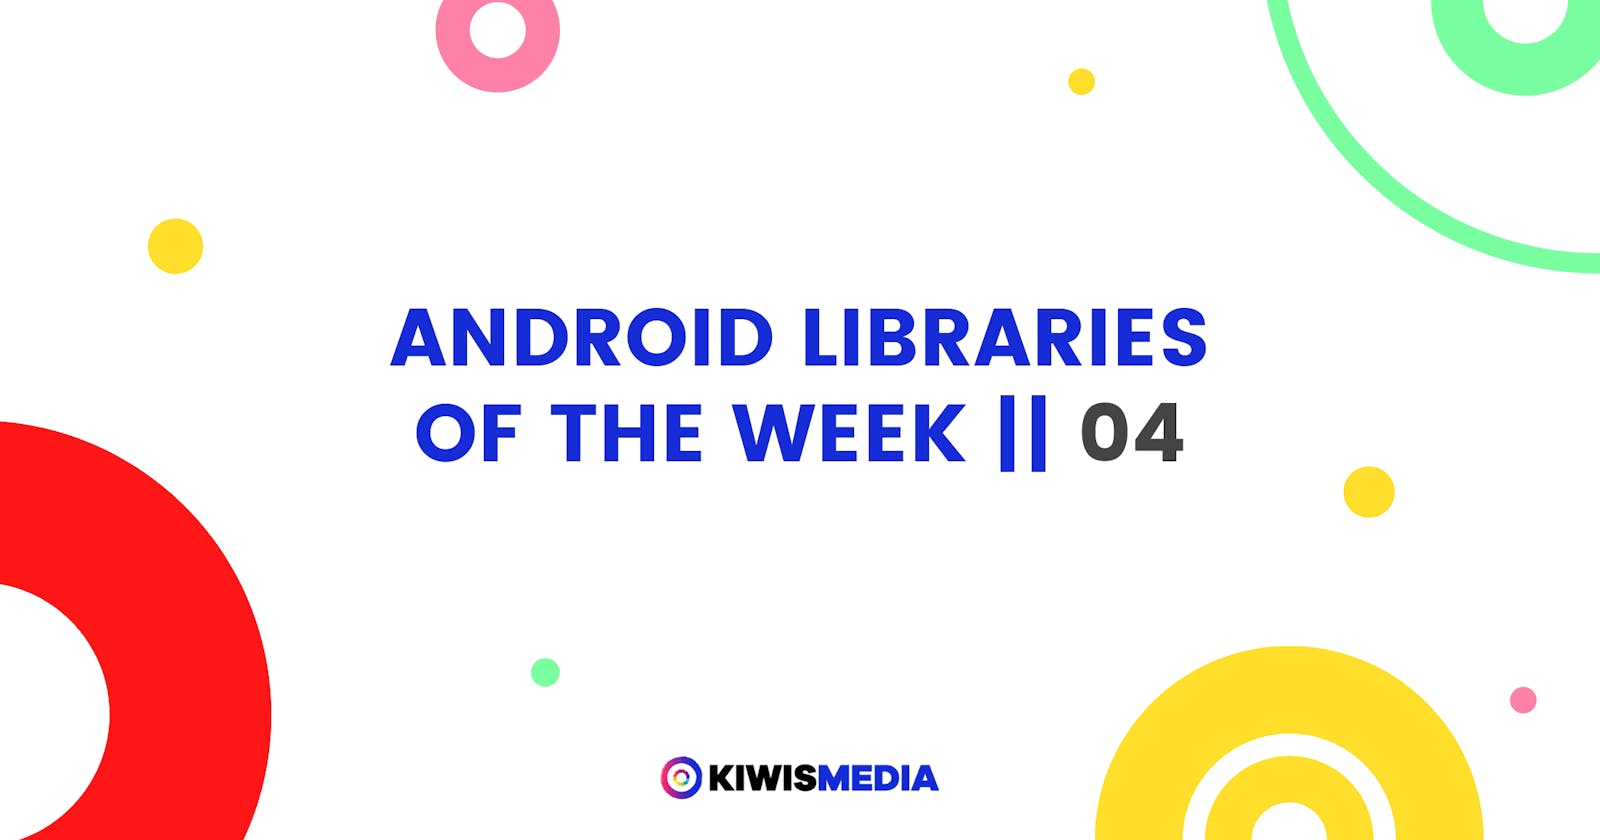 Android Libraries of the Week || 04